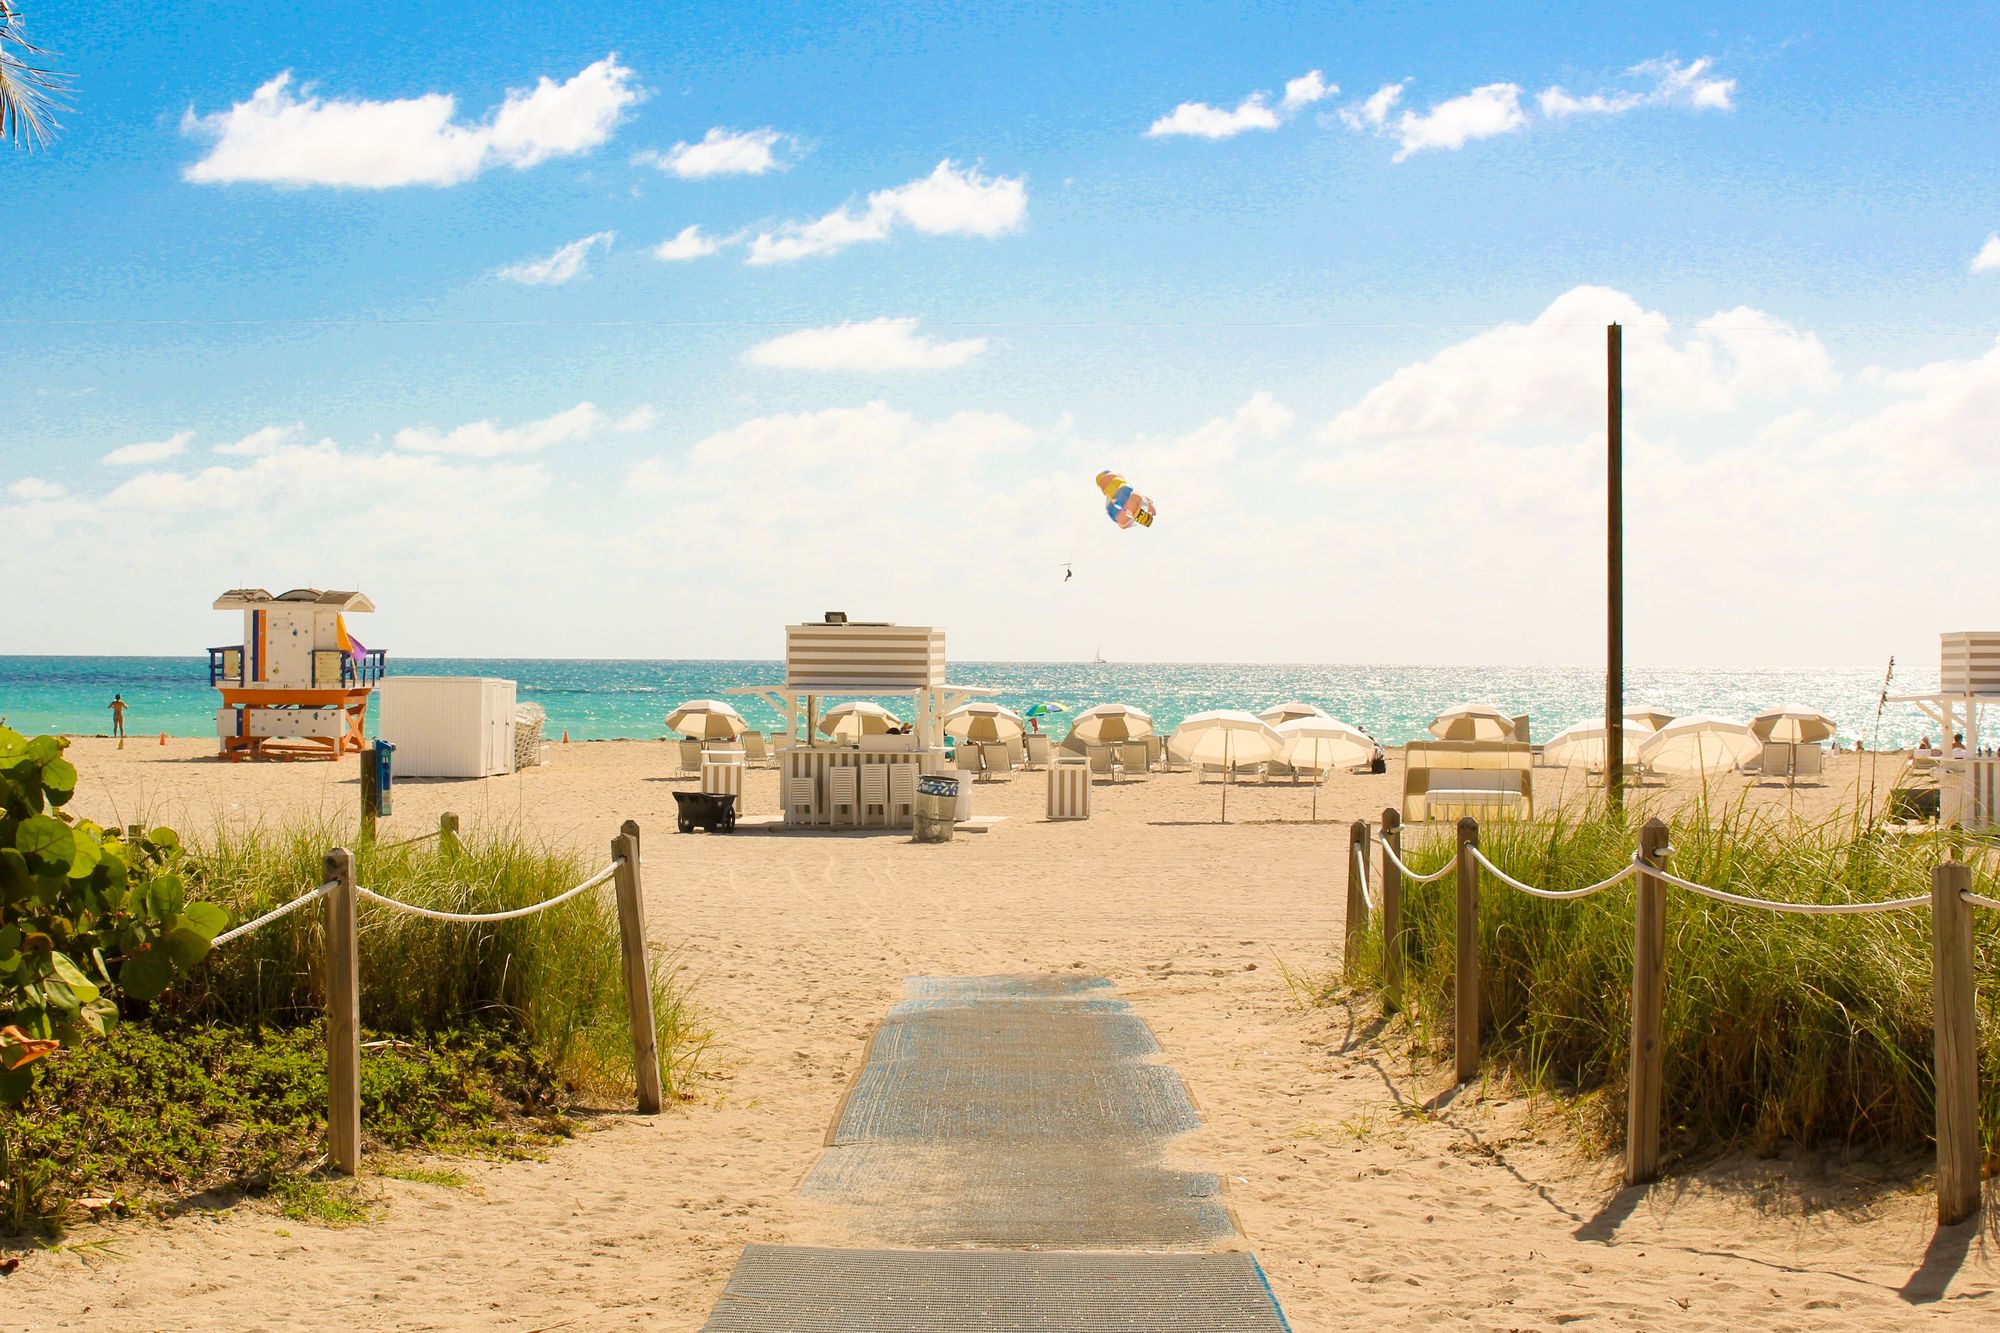 South Beach has many accessible pathway entrances, and you can use wheelchairs for free provided by the city.